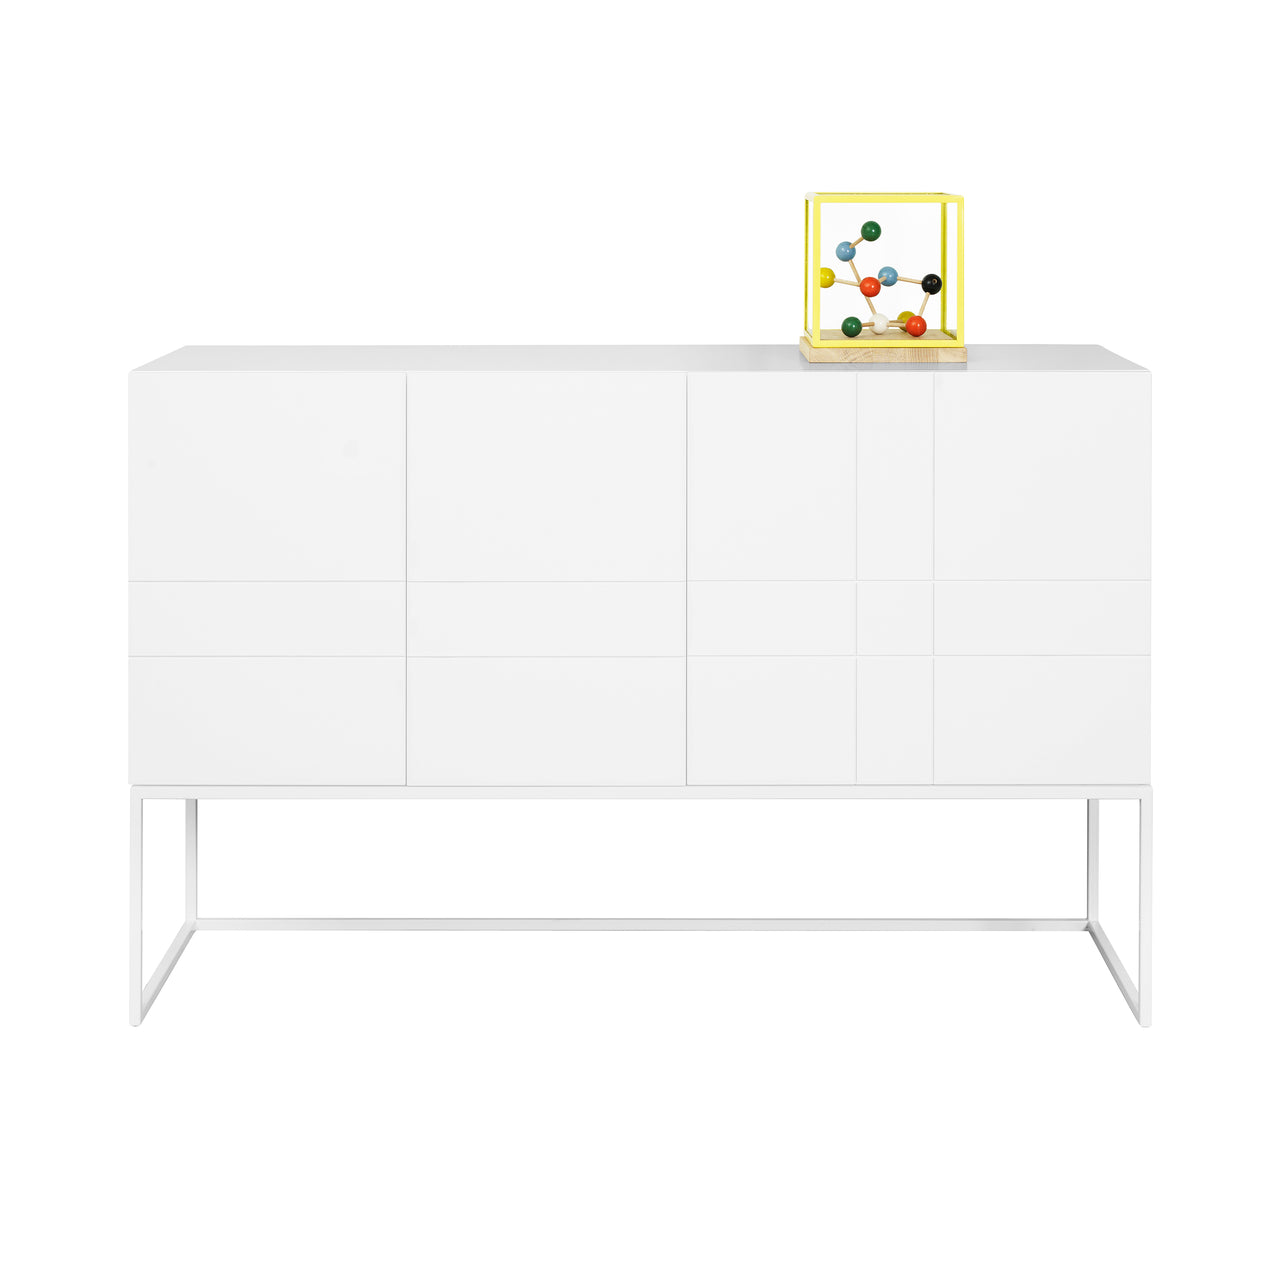 Kilt Light 137 Cabinet with Drawers: White